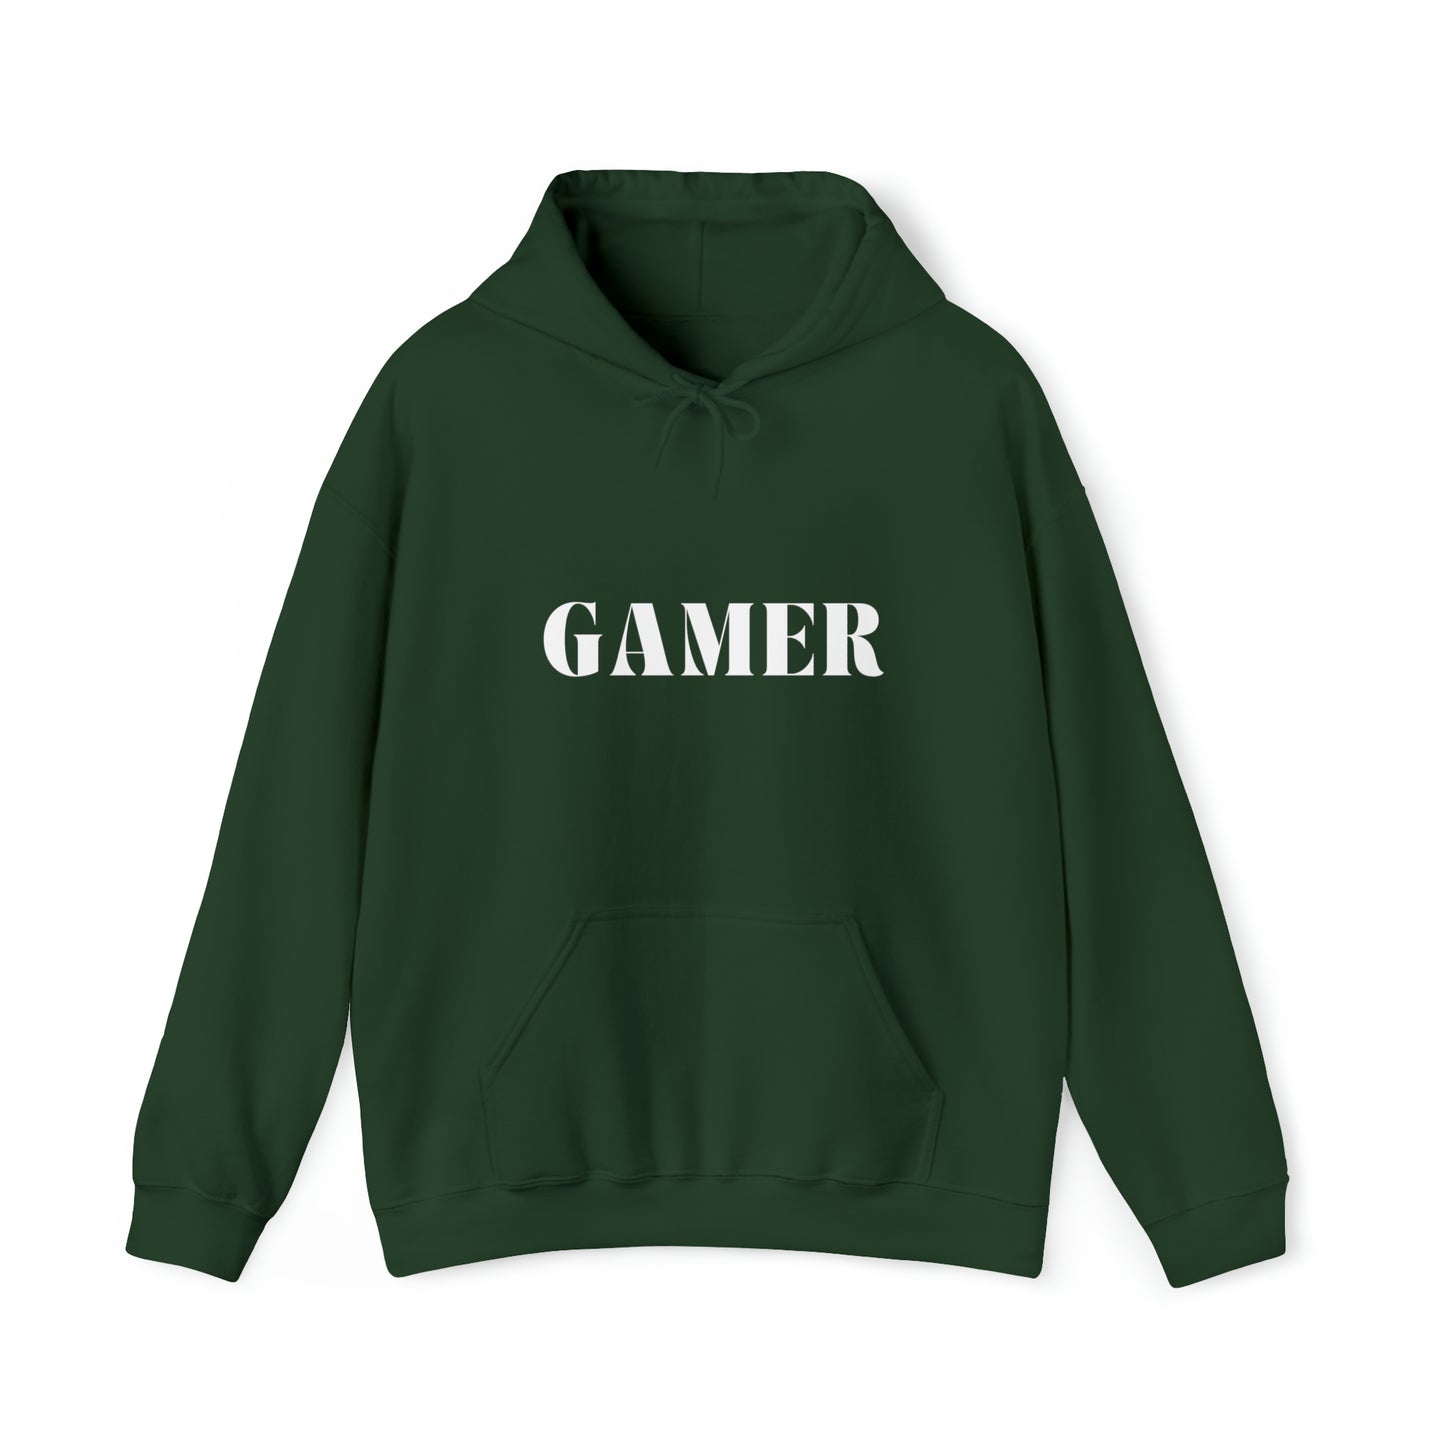 S Forest Green Gamer Hoodie from HoodySZN.com